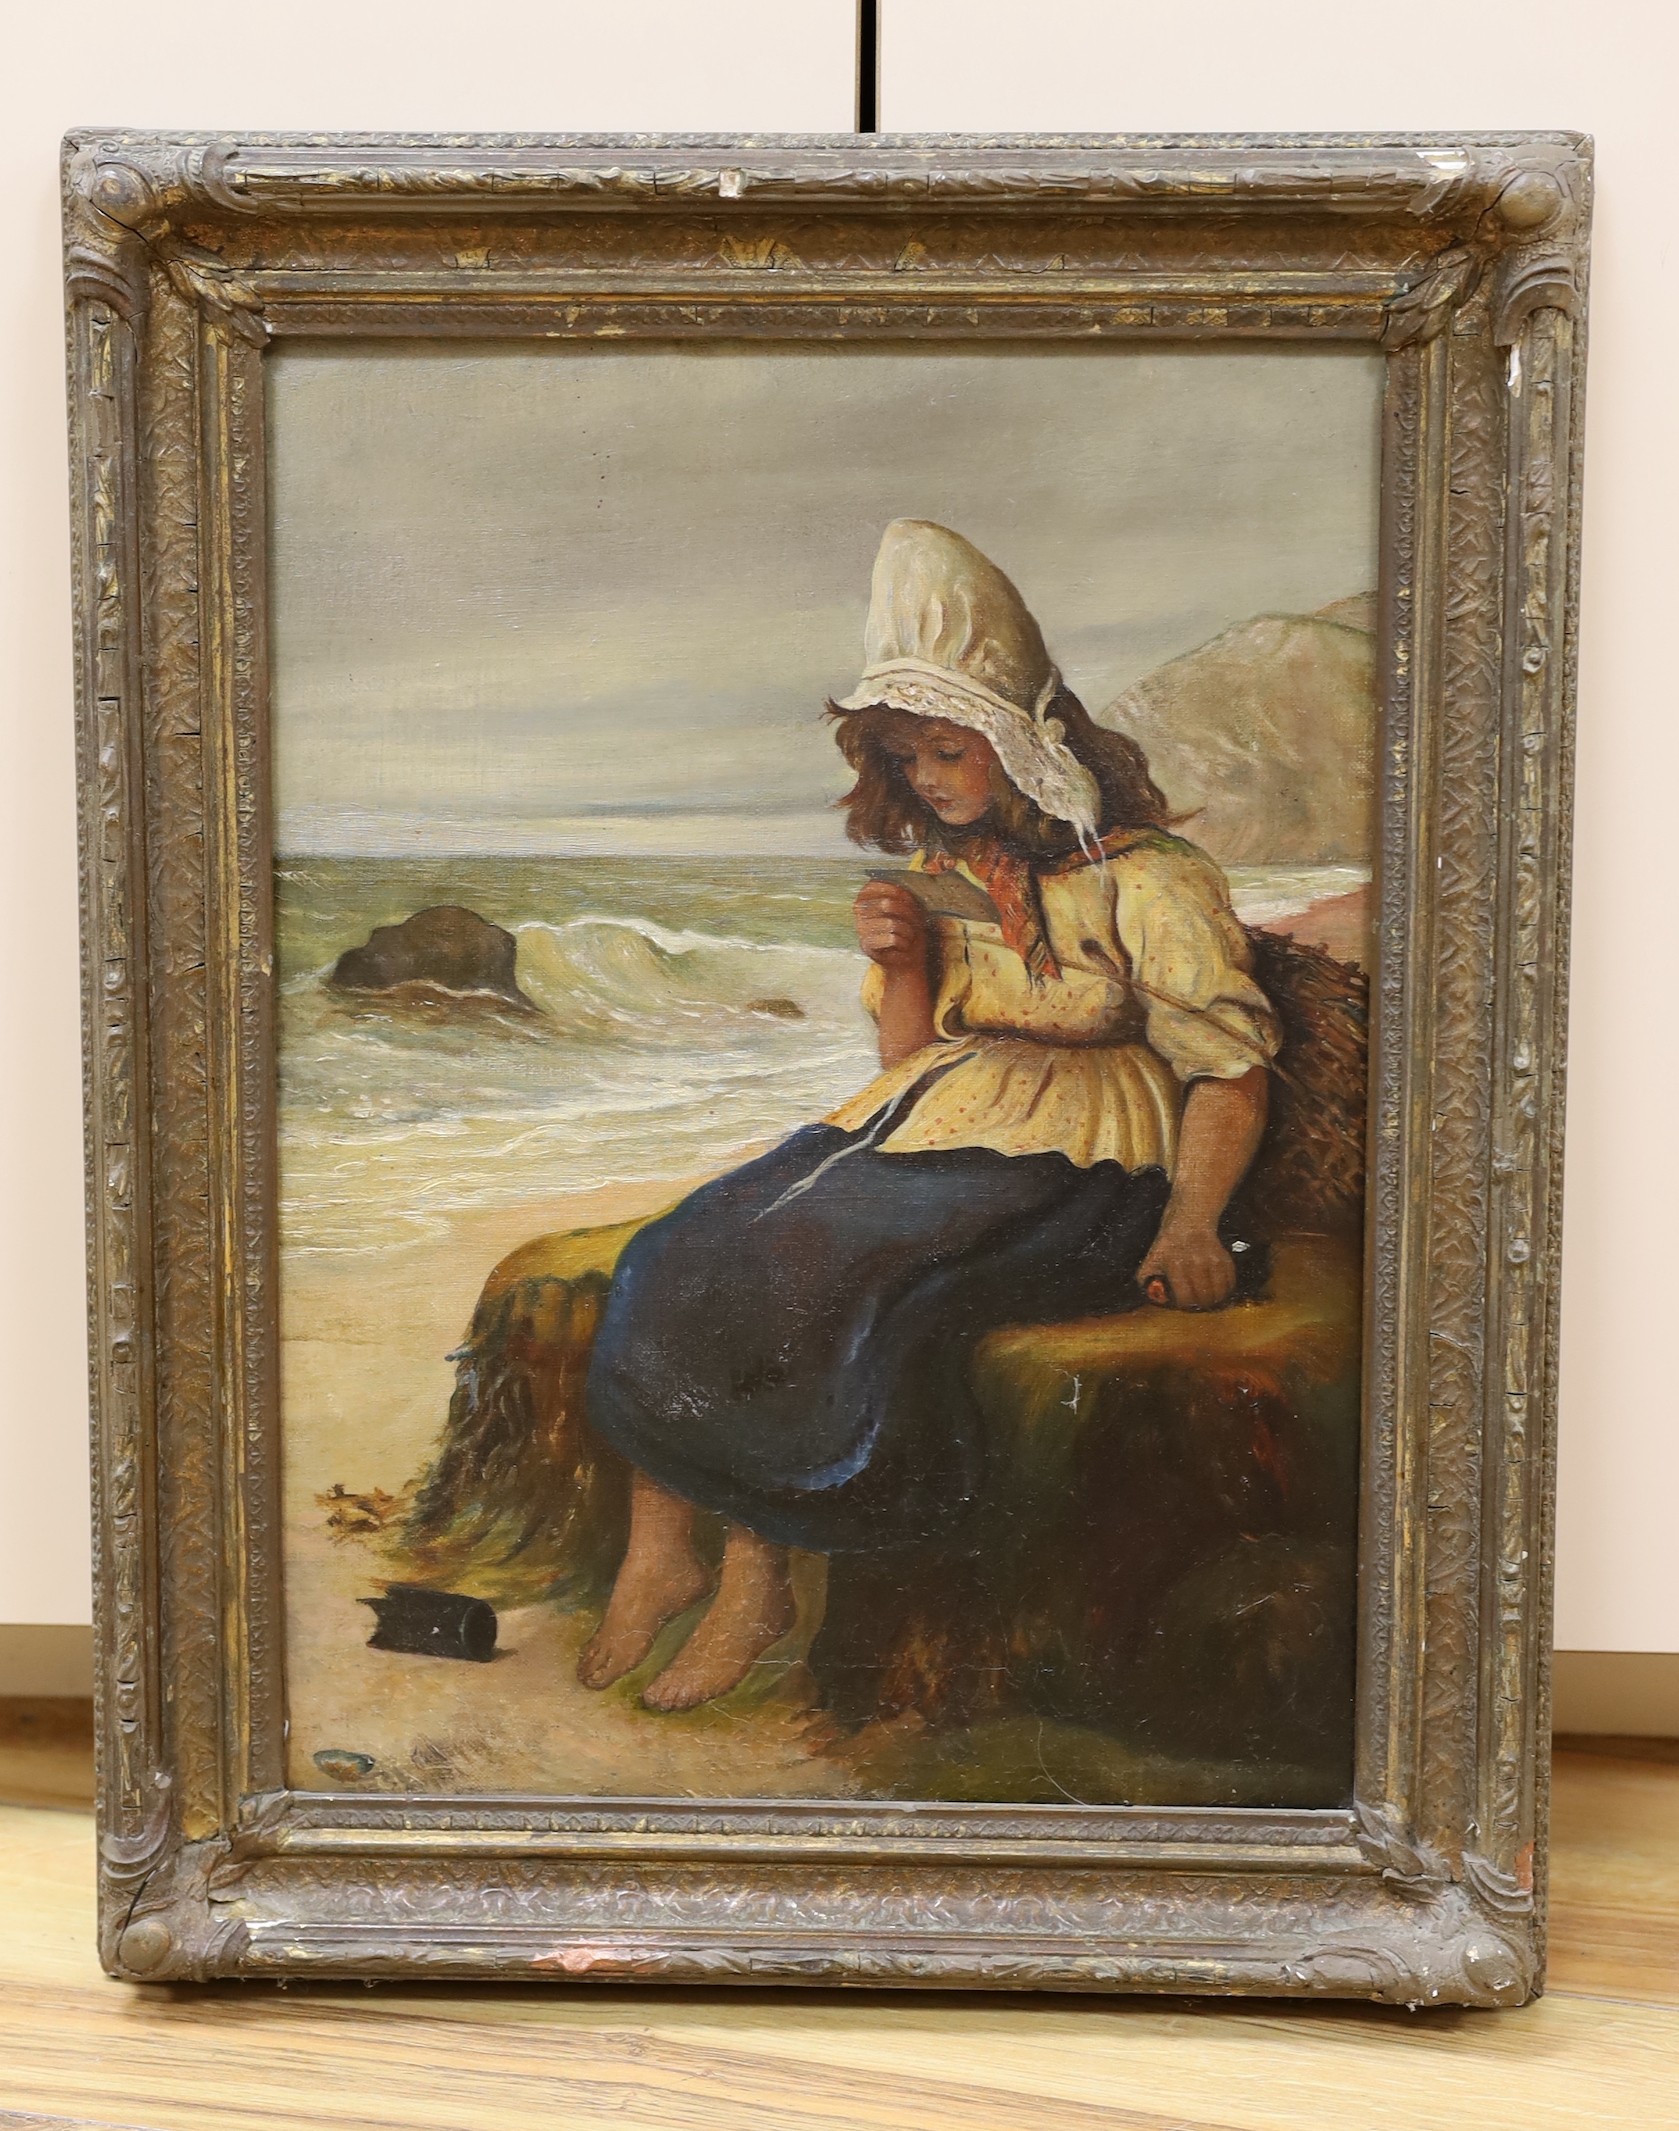 English School c.1900, oil on canvas, Fishergirl reading a letter on the seashore, 39 x 29cm